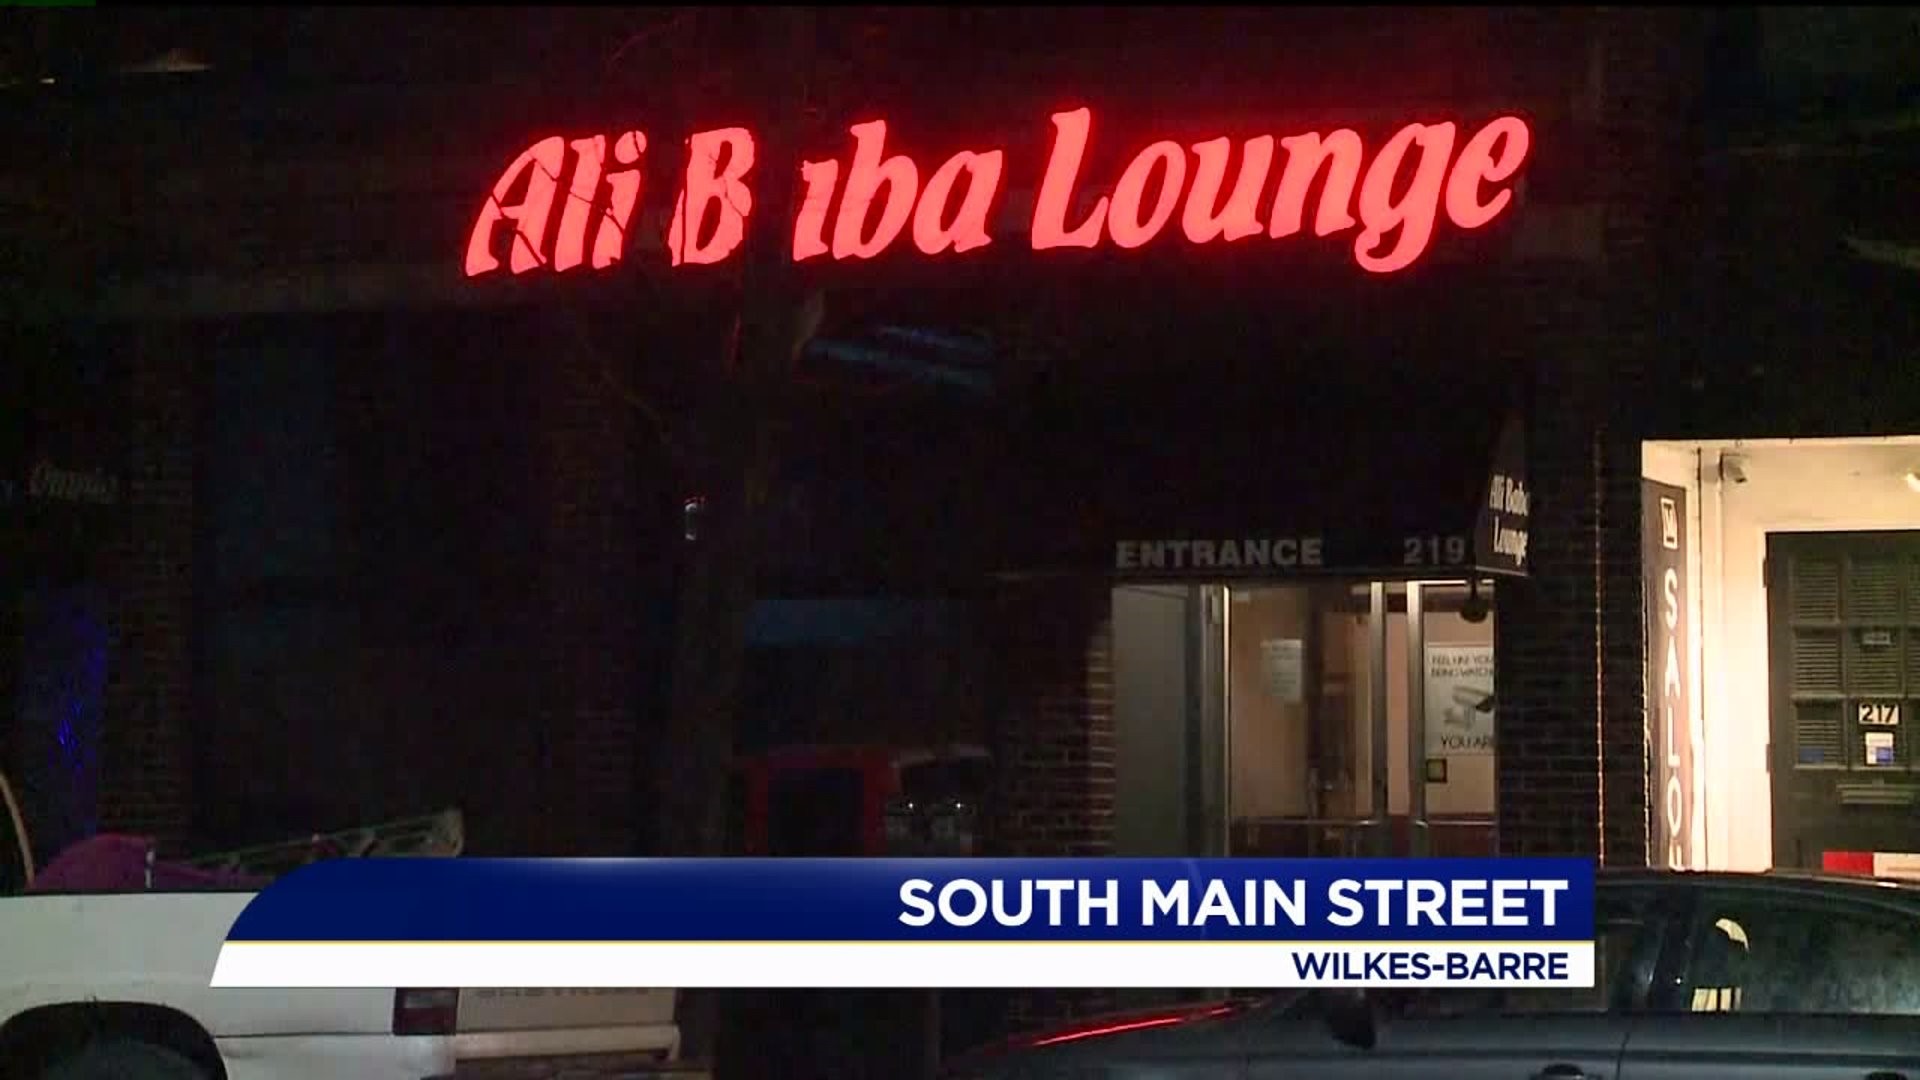 Controversial Nightclub Reopens in Wilkes-Barre